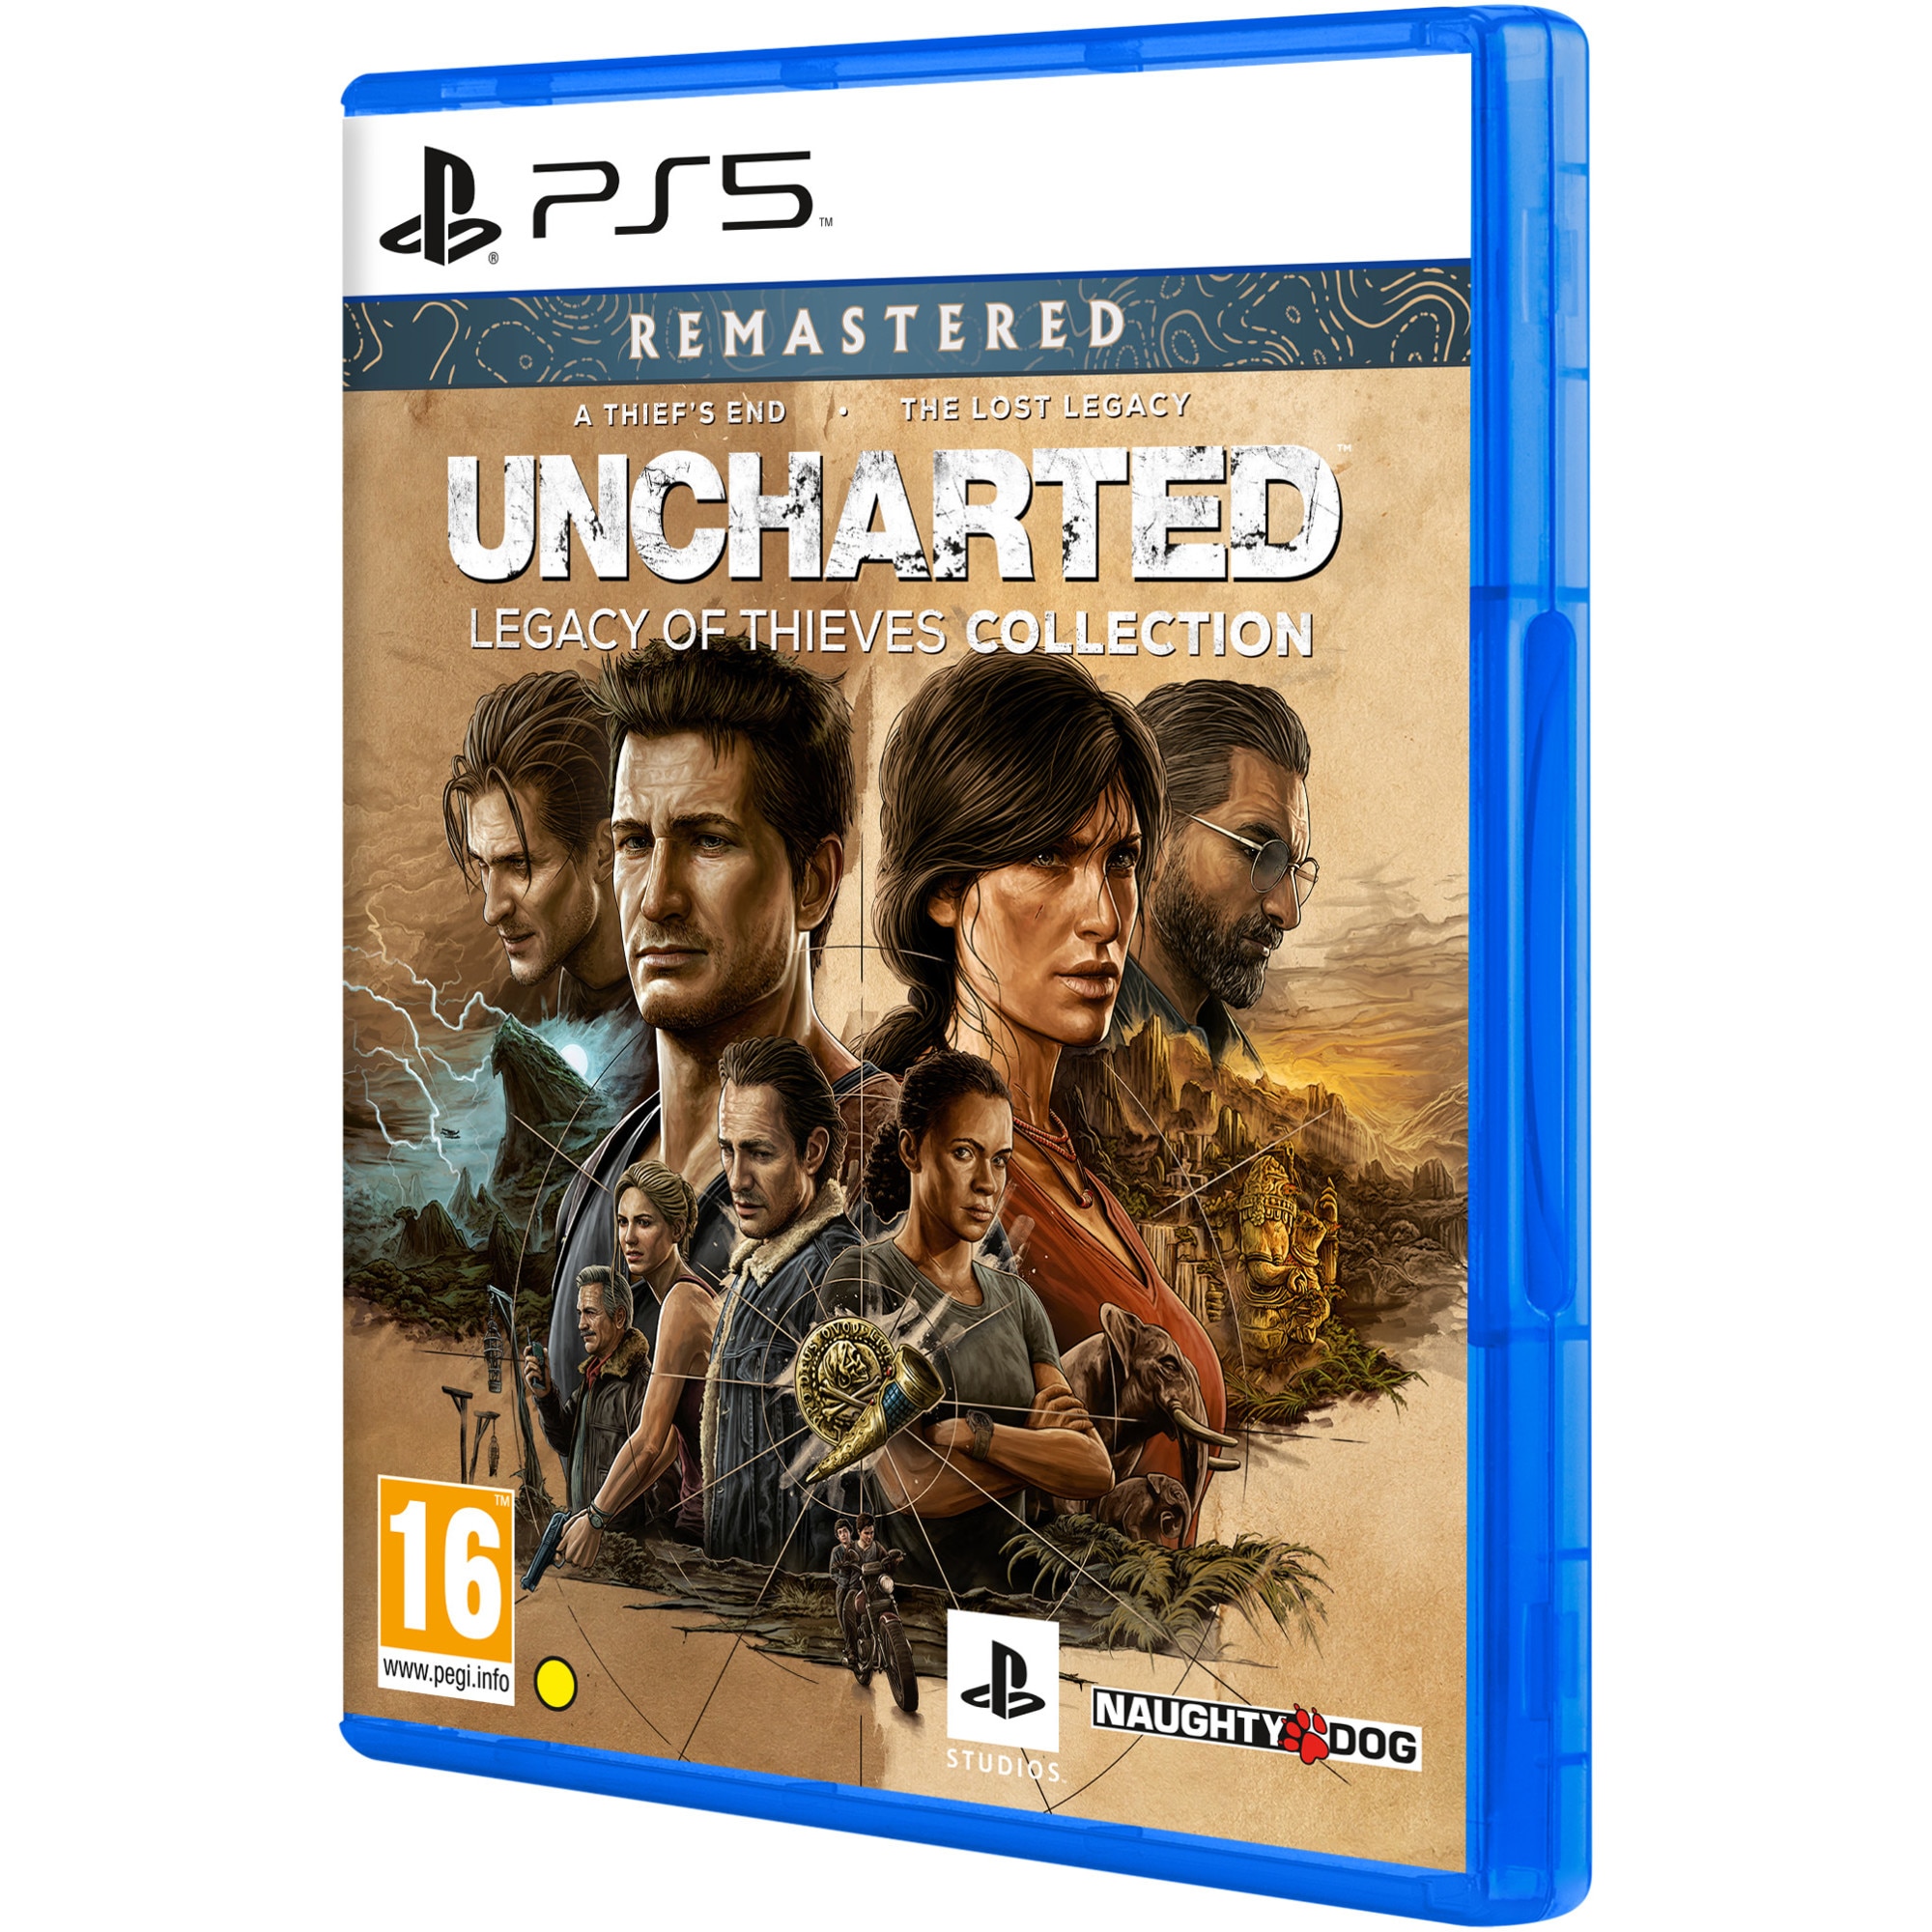 Uncharted thieves collection купить. Uncharted Legacy of Thieves collection ps5. Uncharted ps5 диск. Uncharted Legacy of Thieves collection ps5 обложка. Uncharted пс5.